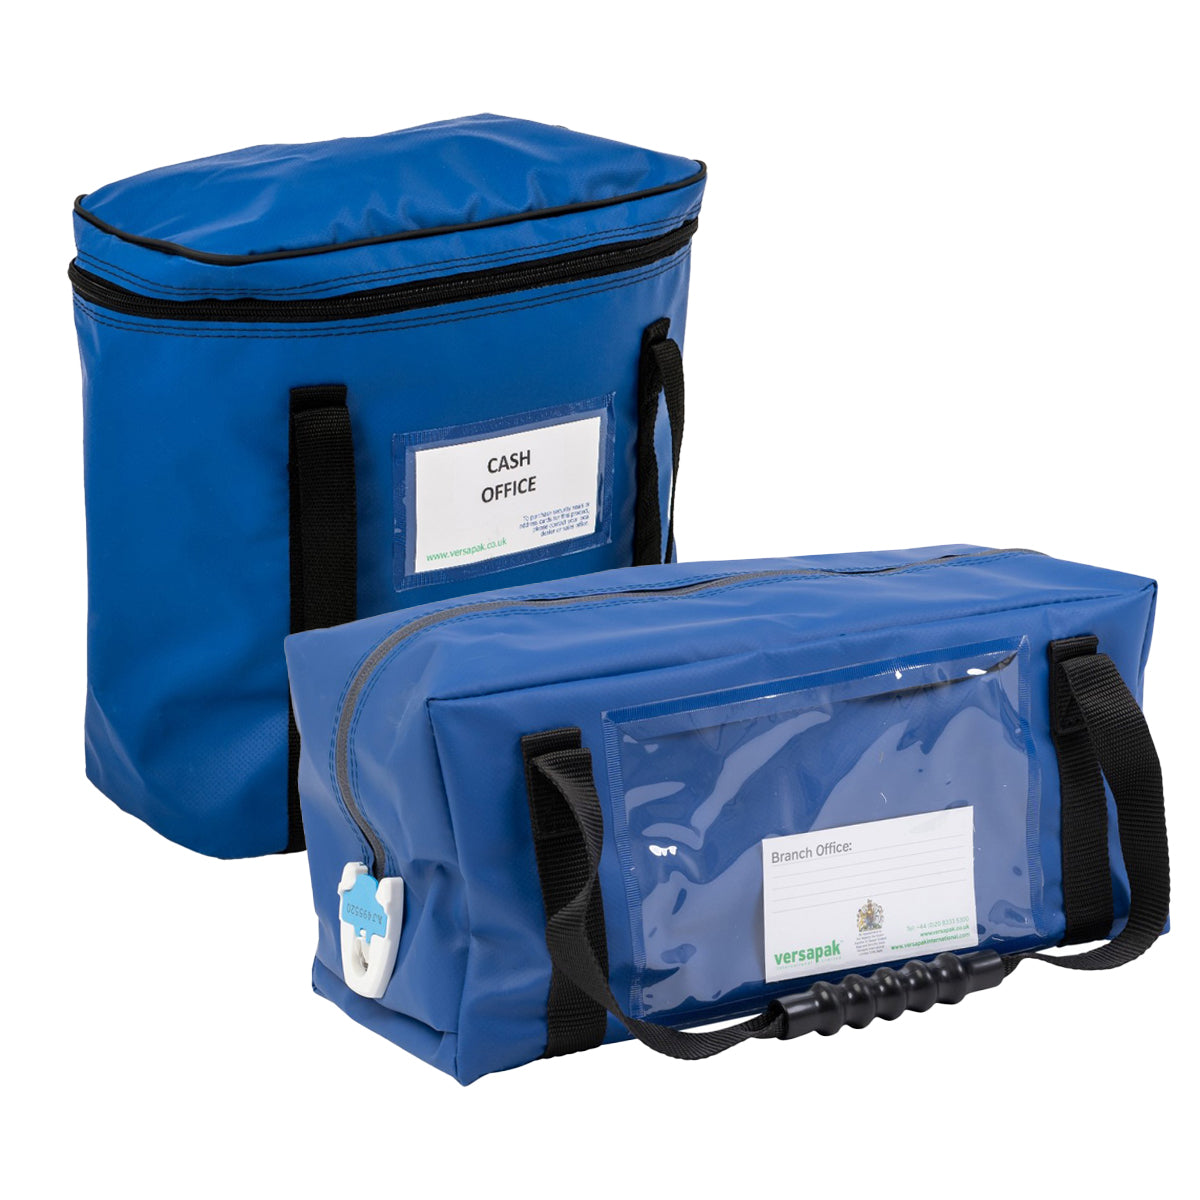 Versapak Secure Cash in Transit Bag Group Image Square and Rectangle